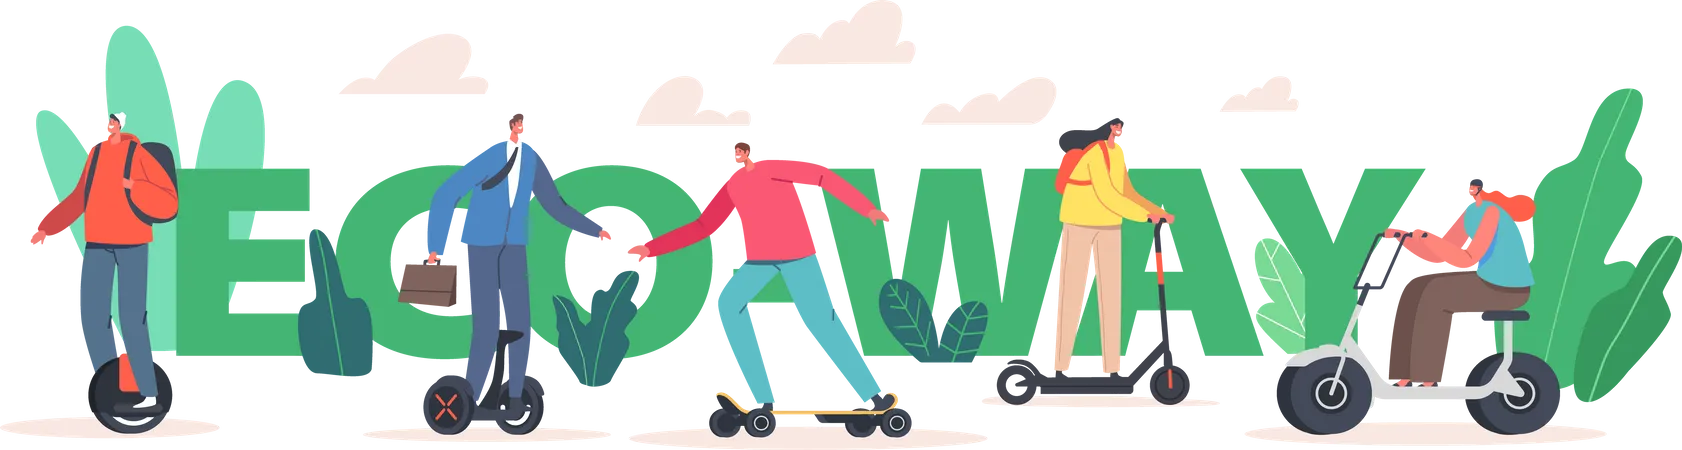 Eco Way Concept Characters Riding Electric Transport Scooter Hoverboard And Monowheel Skateboard Eco Friendly Transportation For City Poster Banner Or Flyer Cartoon People Vector Illustration Illustration